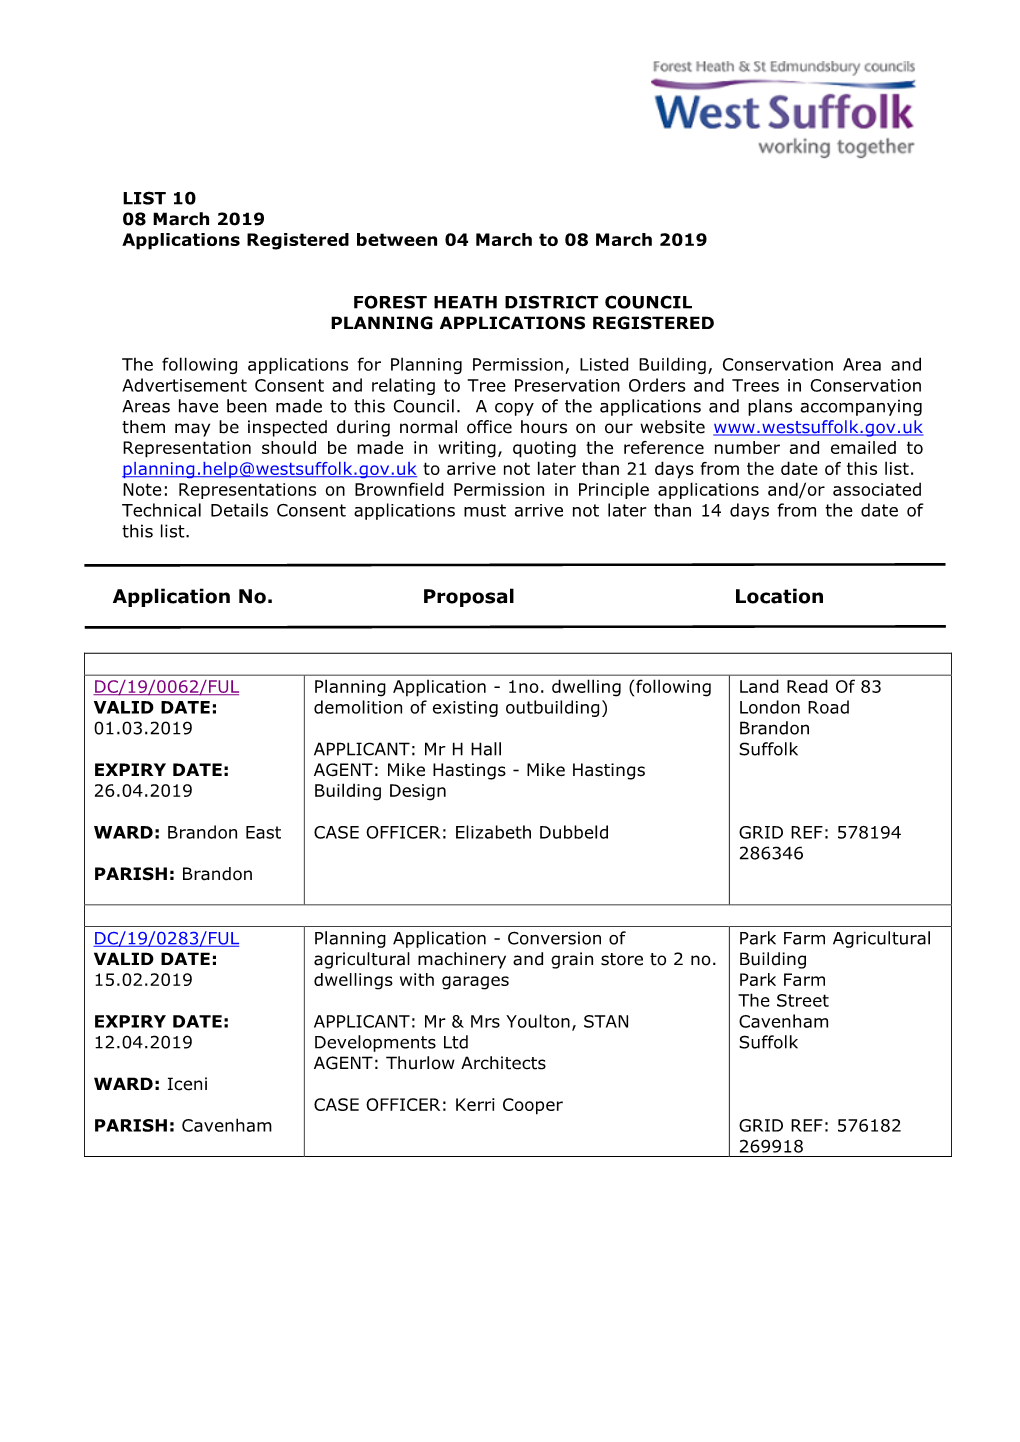 FHDC Planning Applications 10/19